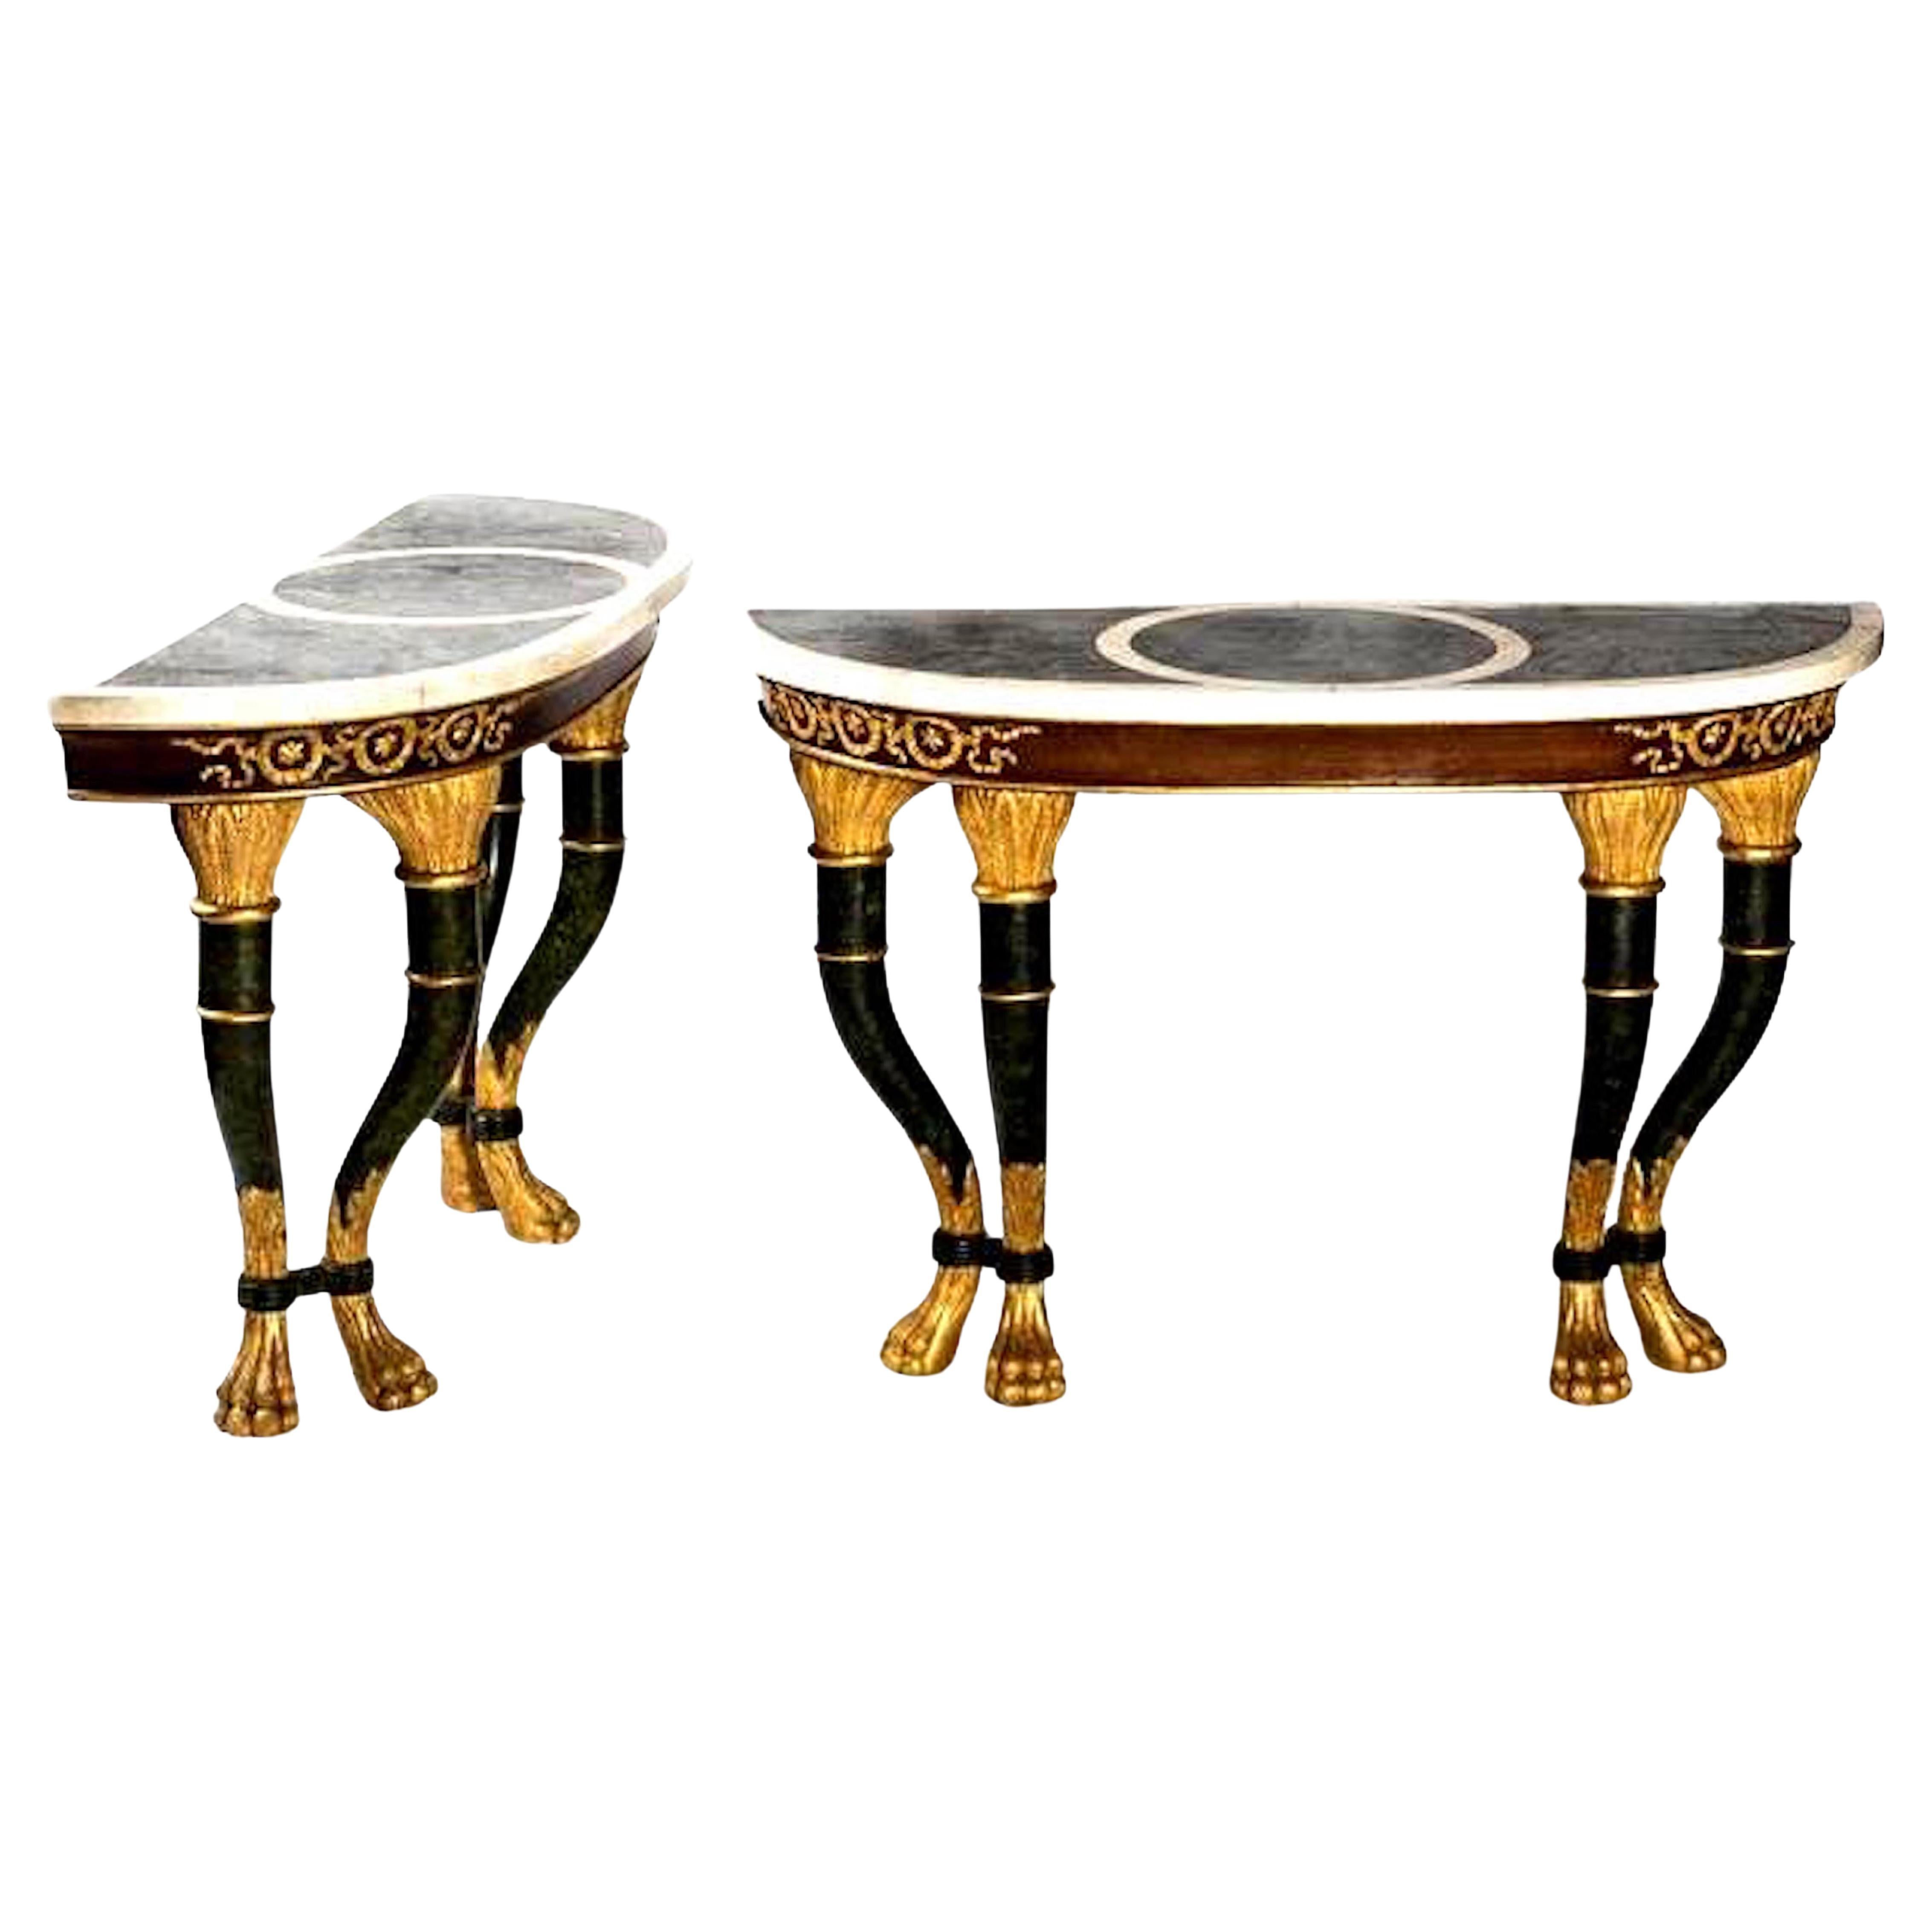 Pair of Sicilians Consoles Made of Wood with Gilding and Stucco, 19th Century For Sale